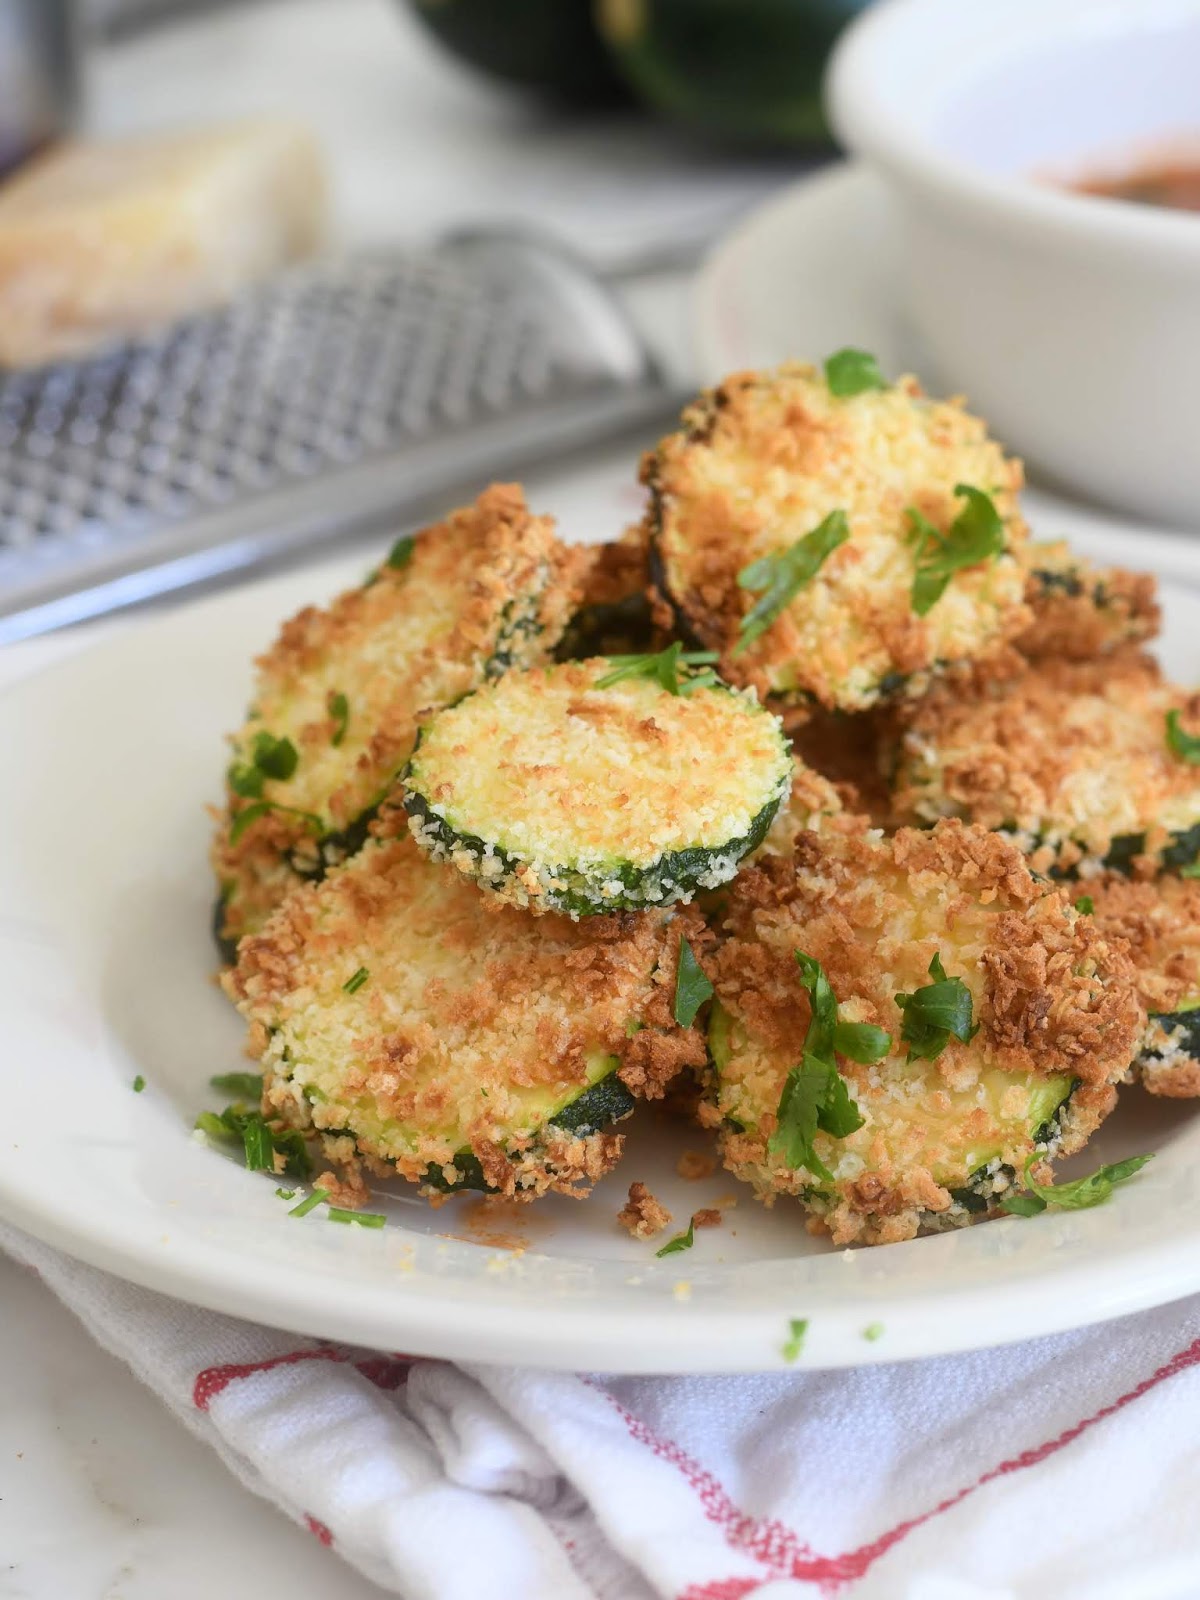 Cooking with Manuela: Air-Fried Zucchini Chips